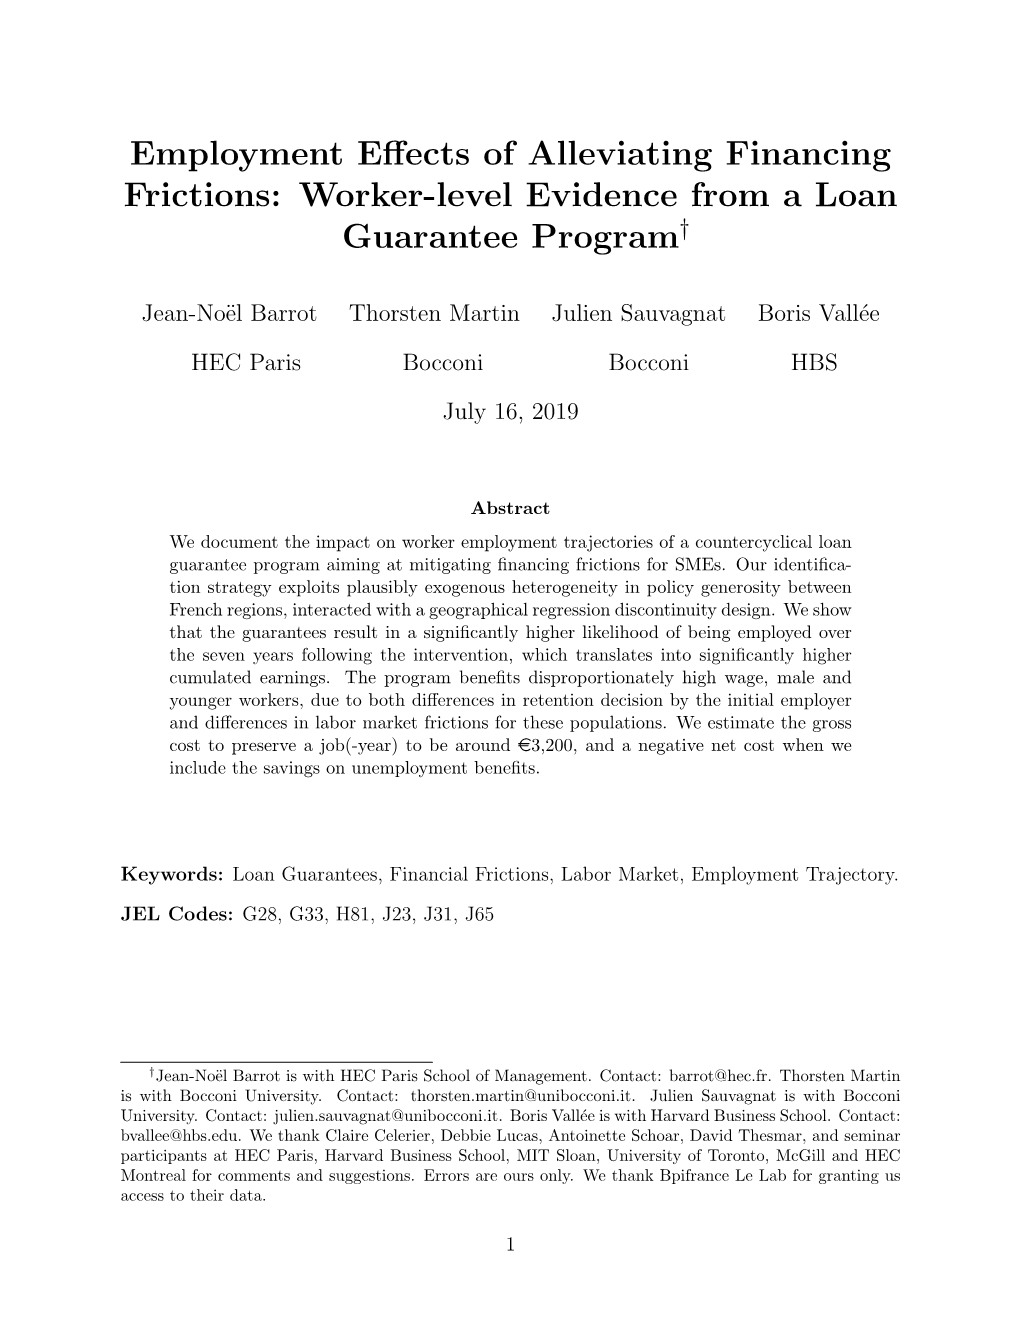 Employment Effects of Alleviating Financing Frictions: Worker-Level